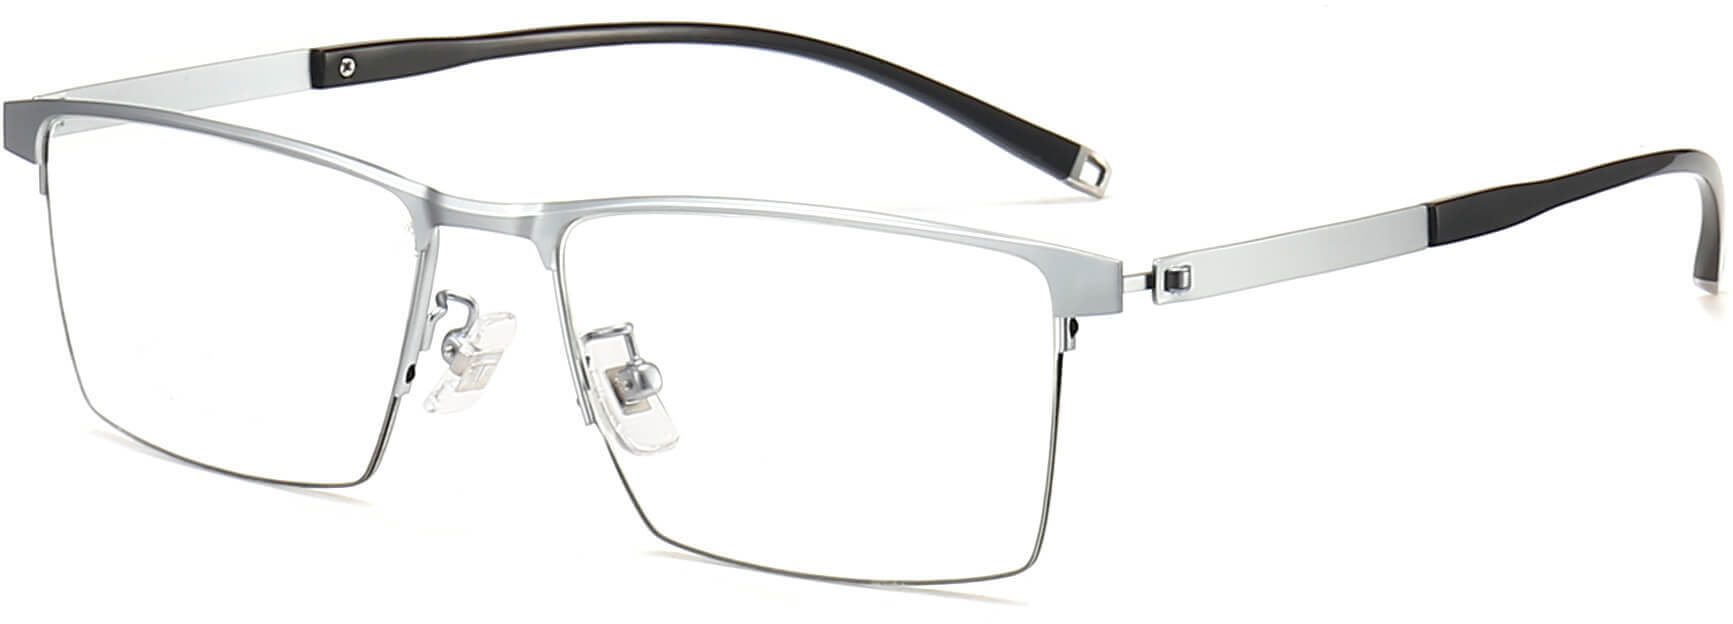 Chaim Square Silver Eyeglasses from ANRRI, angle view